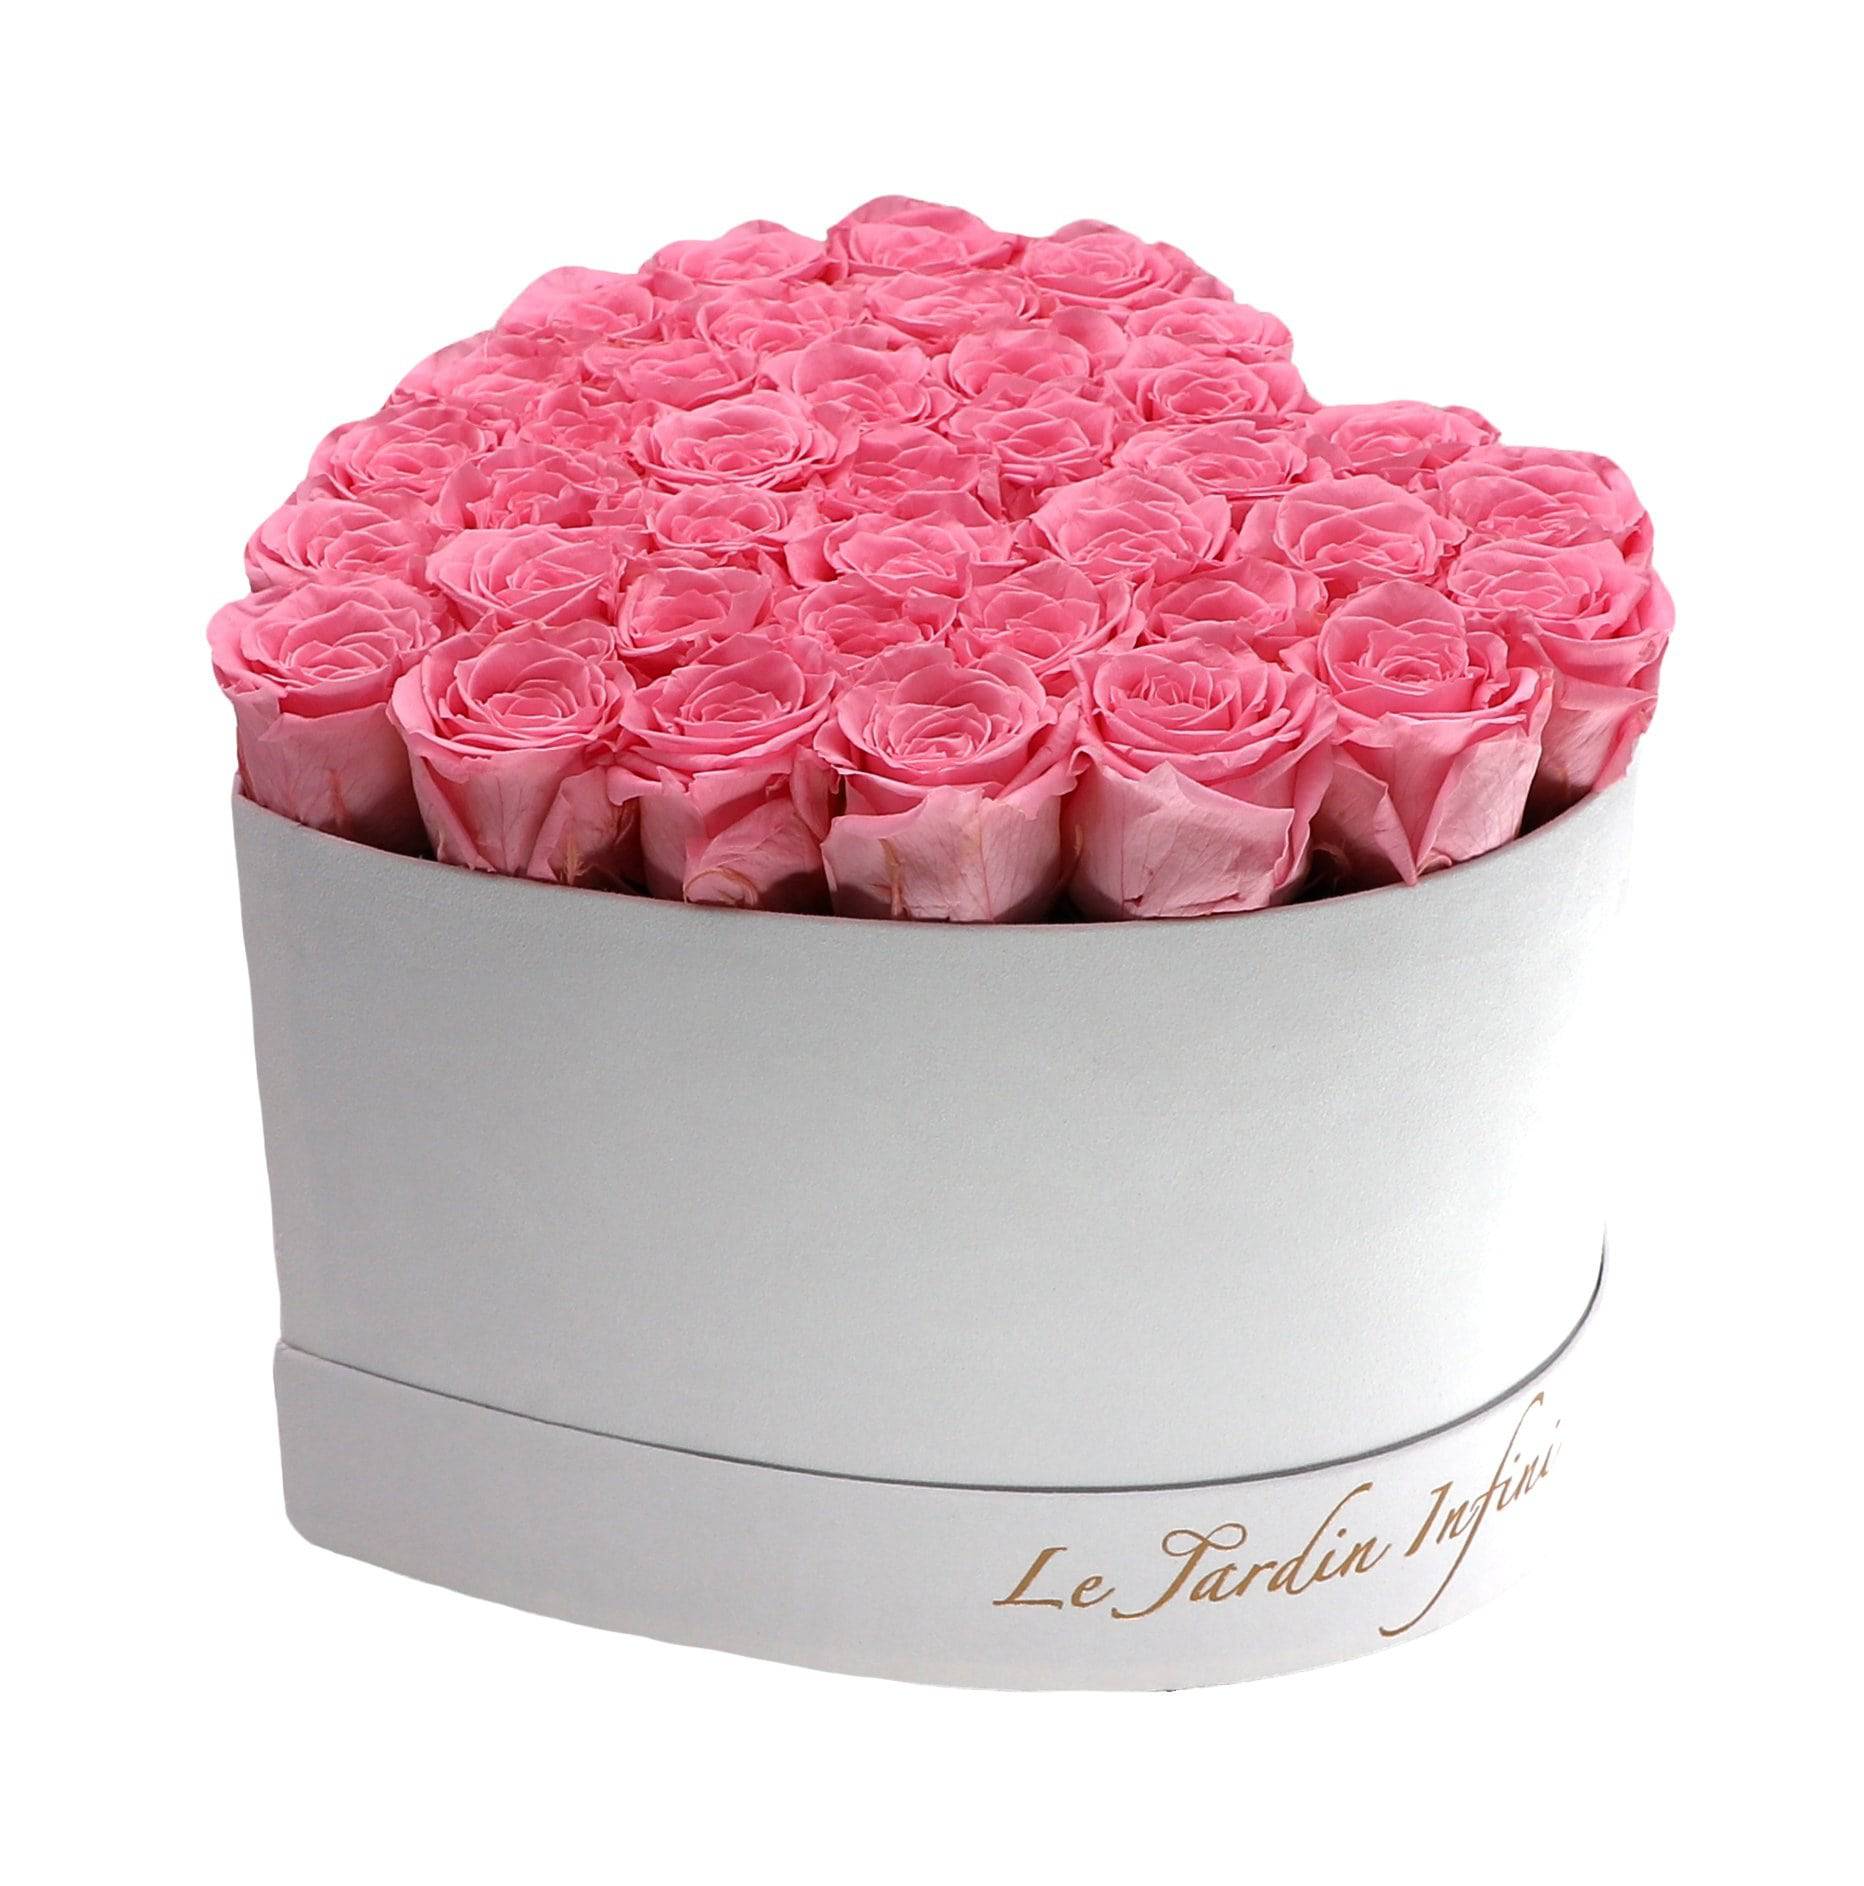 Pink Preserved Roses in A Heart Shaped Box- Small Heart Luxury White Suede Box - Le Jardin Infini Roses in a Box